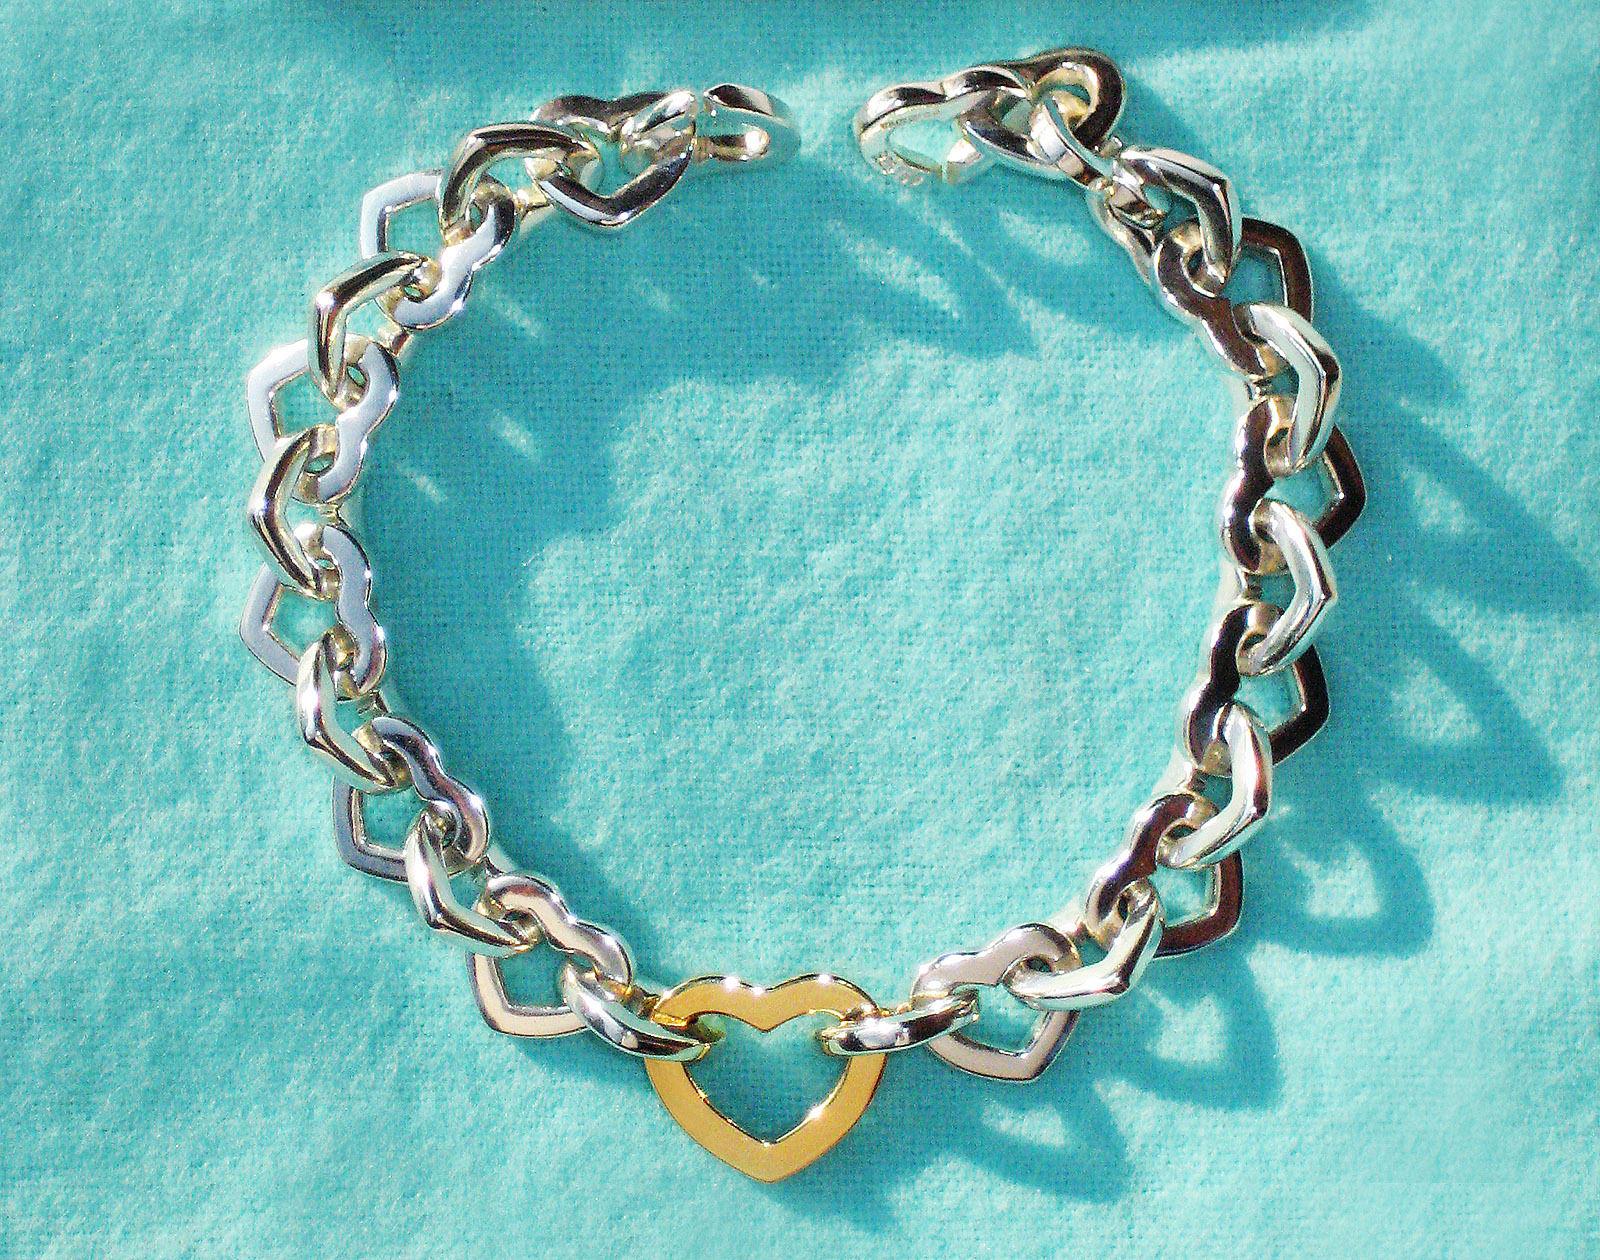 100% Guaranteed Authentic Tiffany & Co. 18K Gold & 925 Sterling Silver Heart Bracelet, Hallmarked 750 & 925 ©Tiffany & Co
18K Gold Heart Measures 5/8